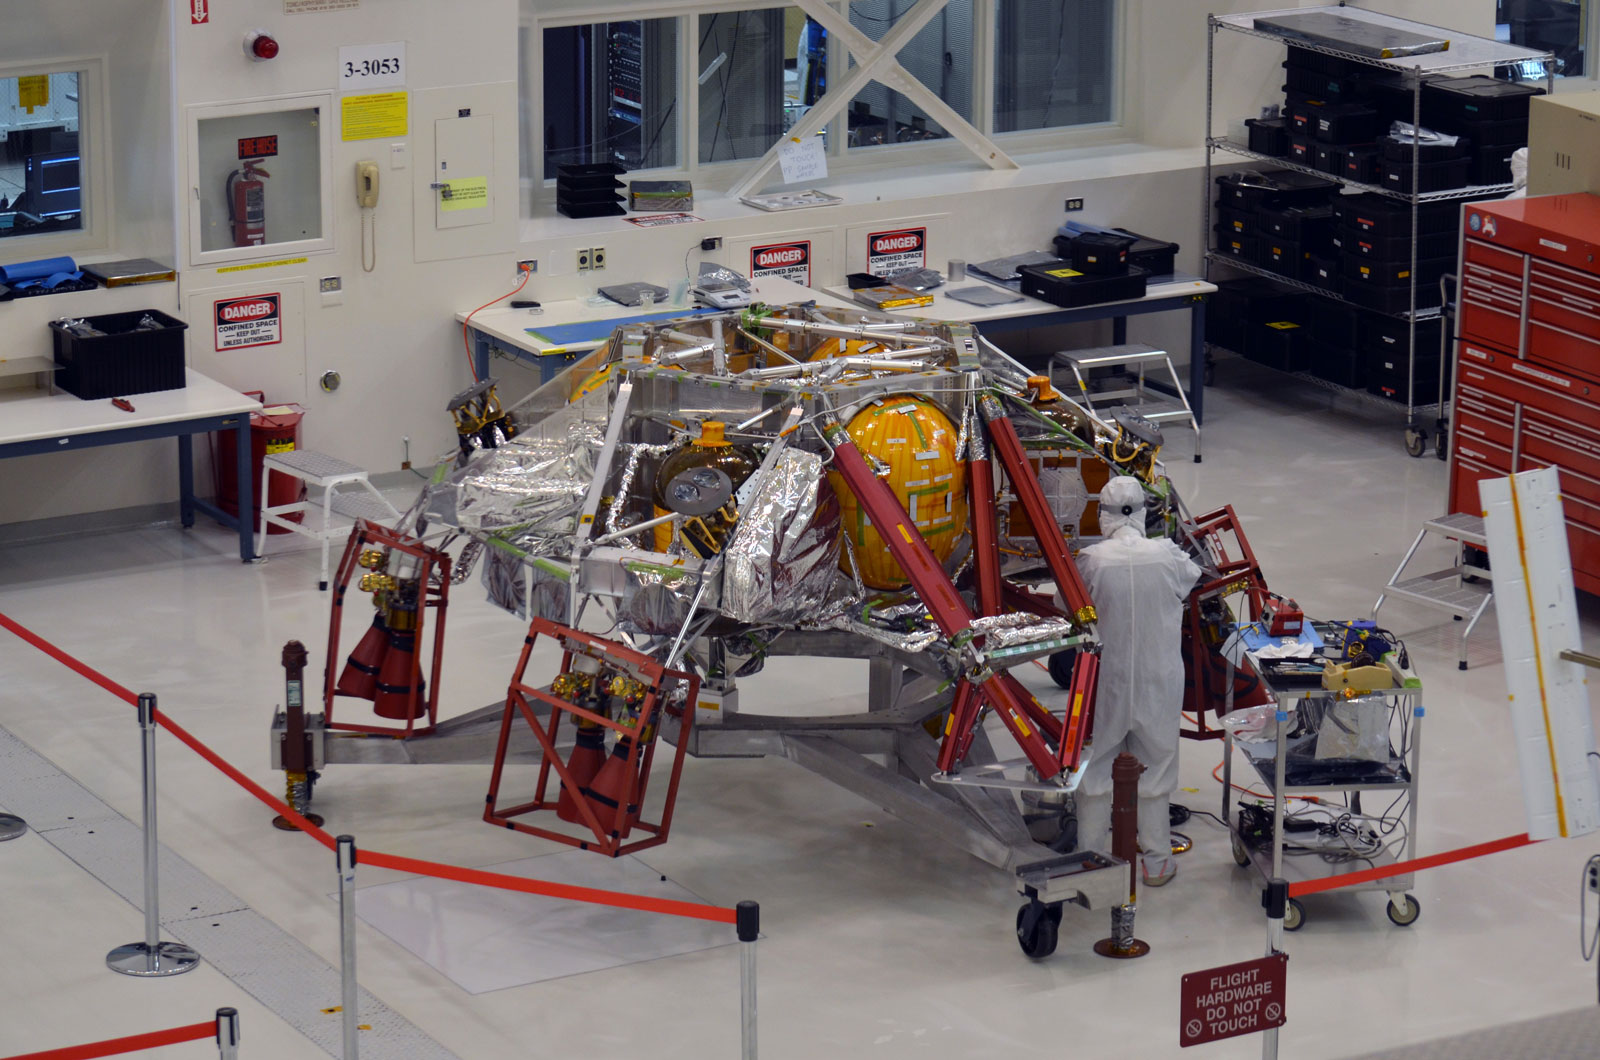 A technician working on the descent stage for NASA’s Mars 2020 mission inside JPL’s Spacecraft Assembly Facility.